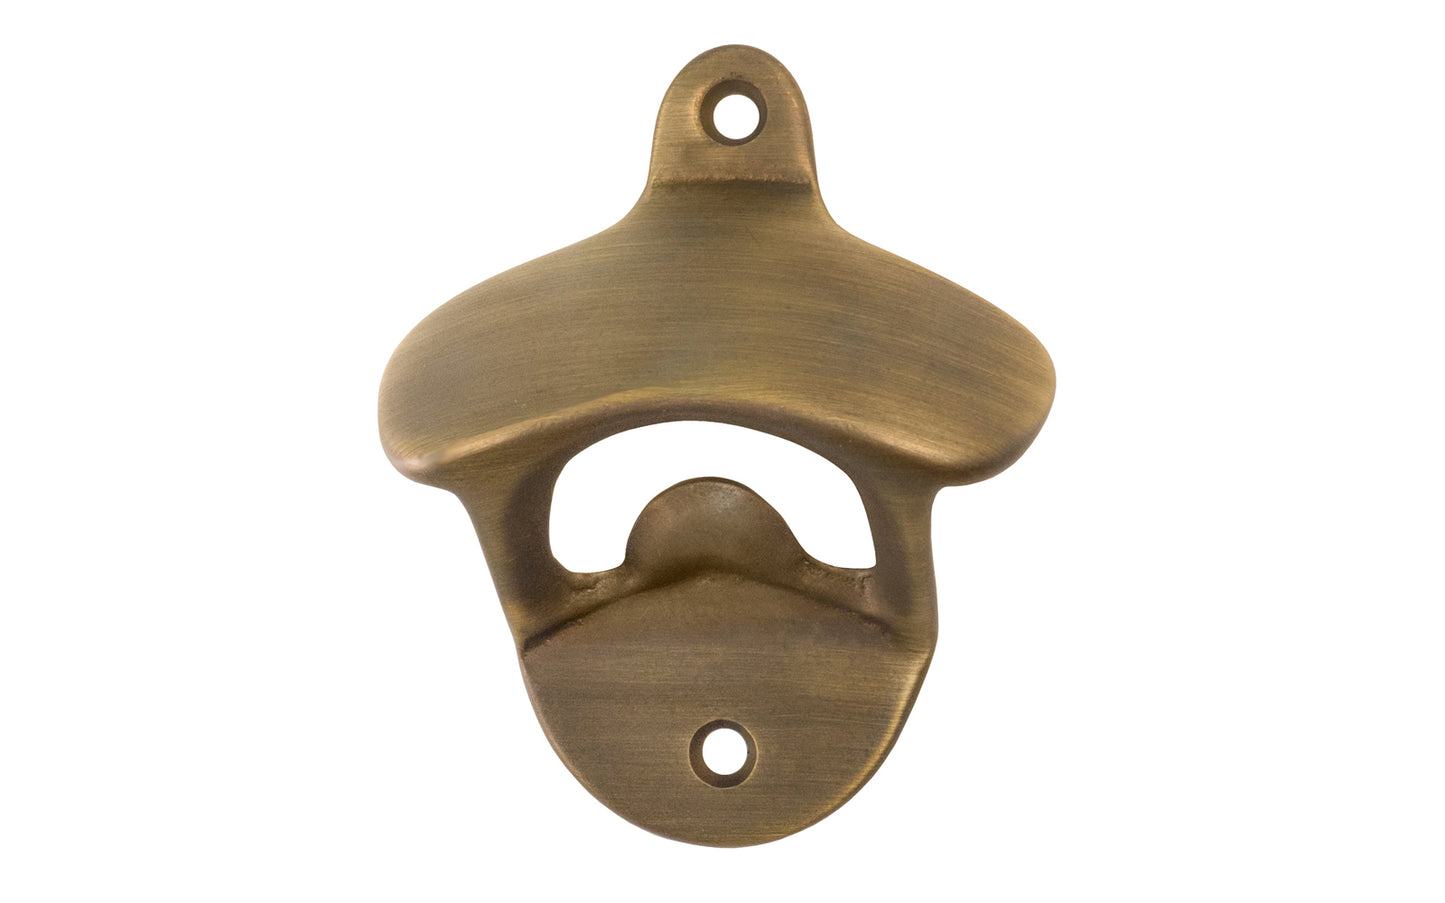 Vintage-Style Classic Solid Brass Bottle Opener. Great for kitchens, the garage, ice boxes, the boat, the grill. Old style traditional wall mount solid brass bottle opener. Reproduction hardware surface mount bottle opener. Antique Brass Finish.